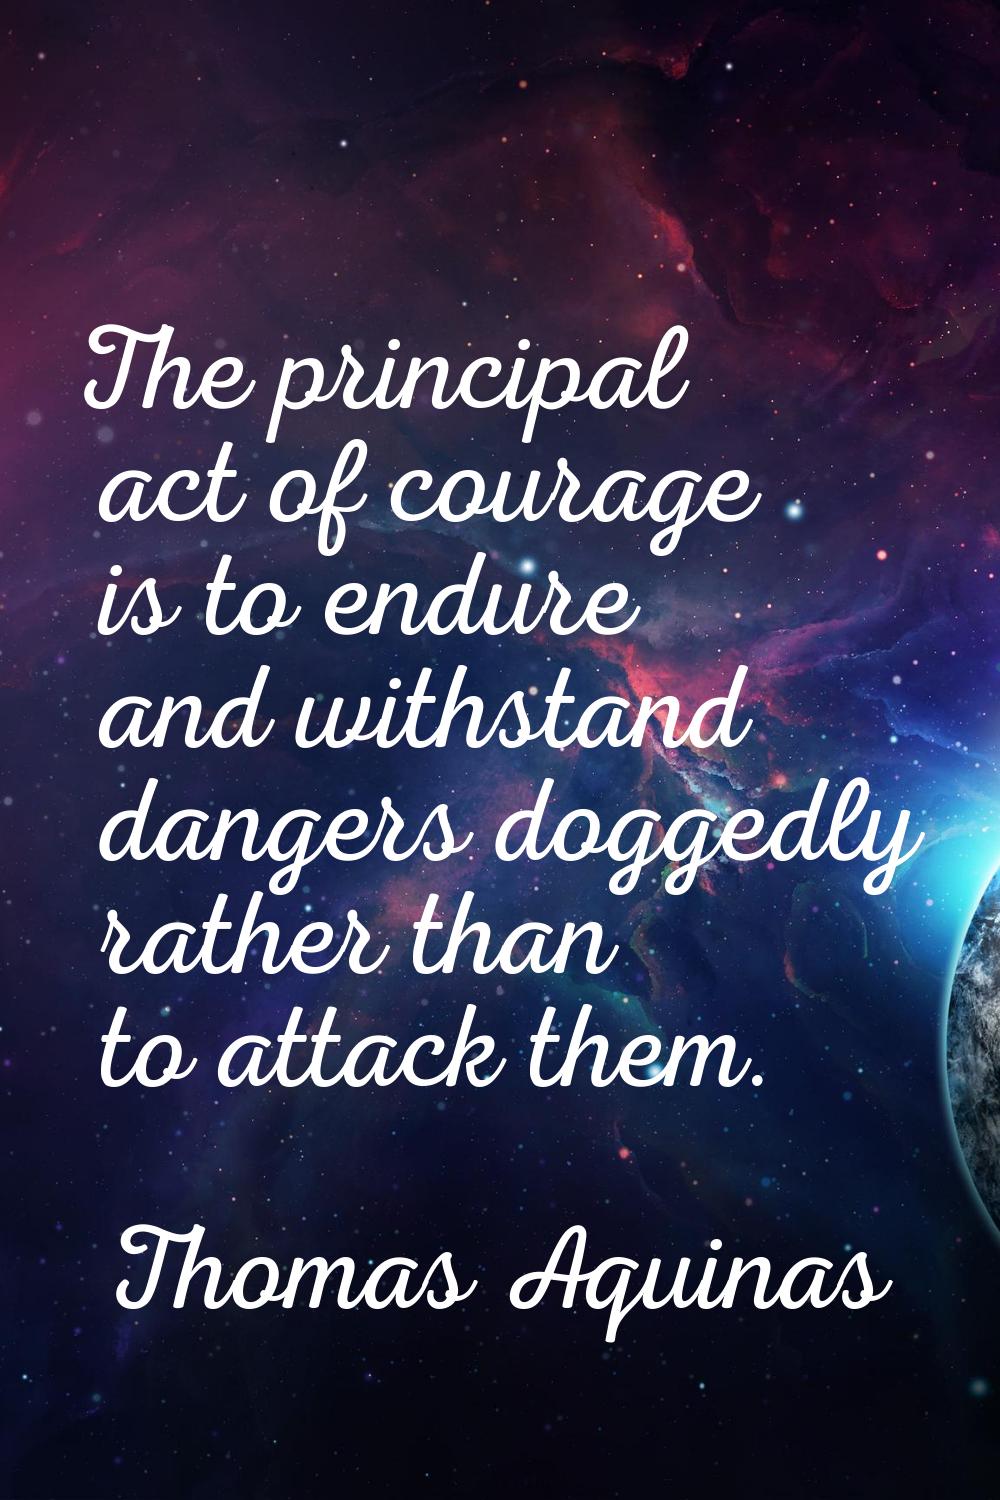 The principal act of courage is to endure and withstand dangers doggedly rather than to attack them